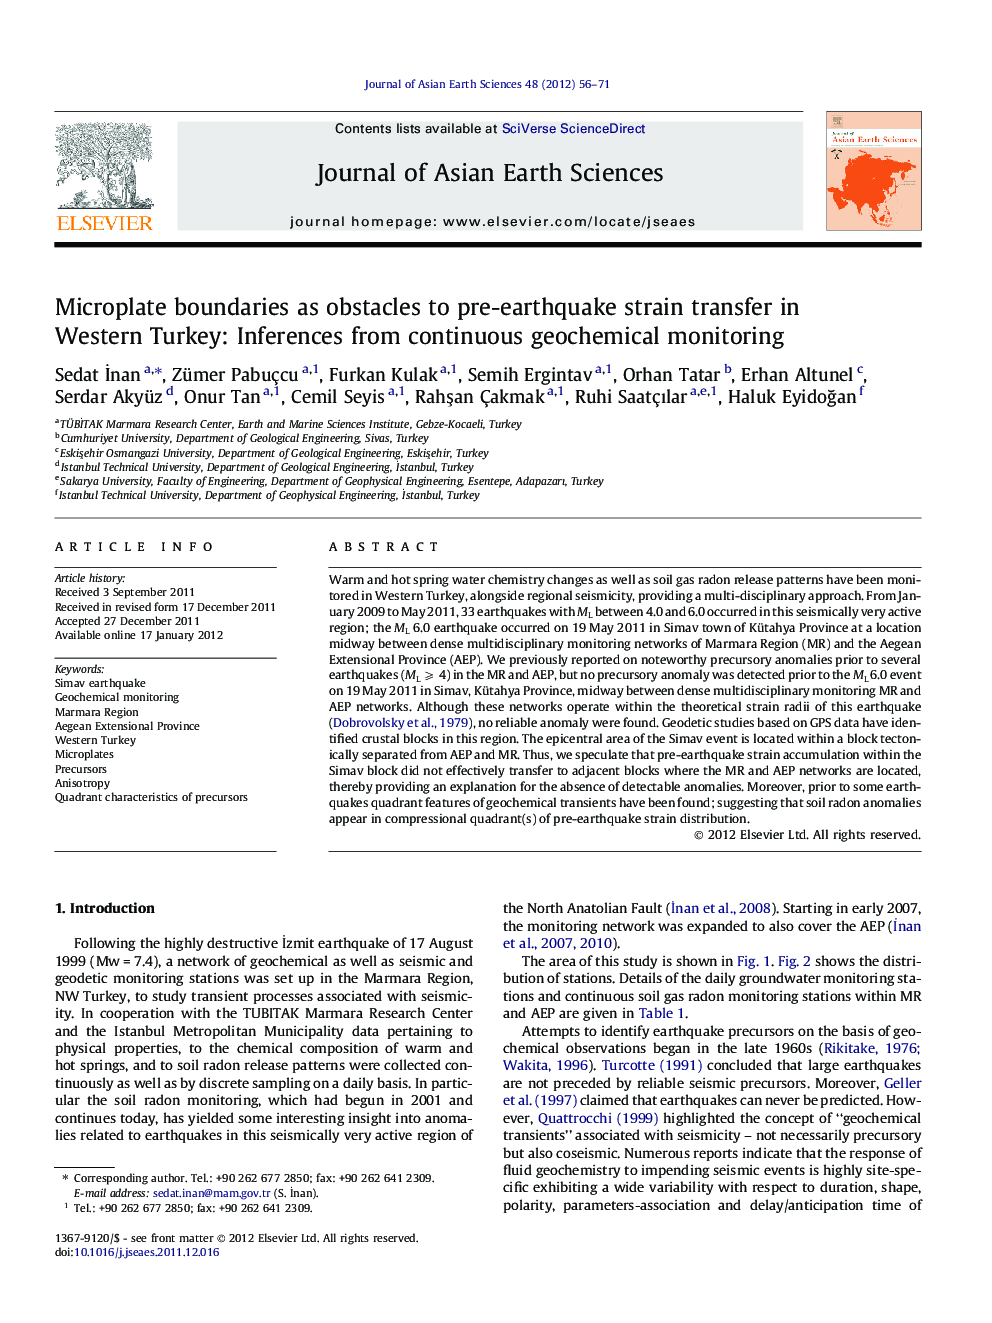 Microplate boundaries as obstacles to pre-earthquake strain transfer in Western Turkey: Inferences from continuous geochemical monitoring